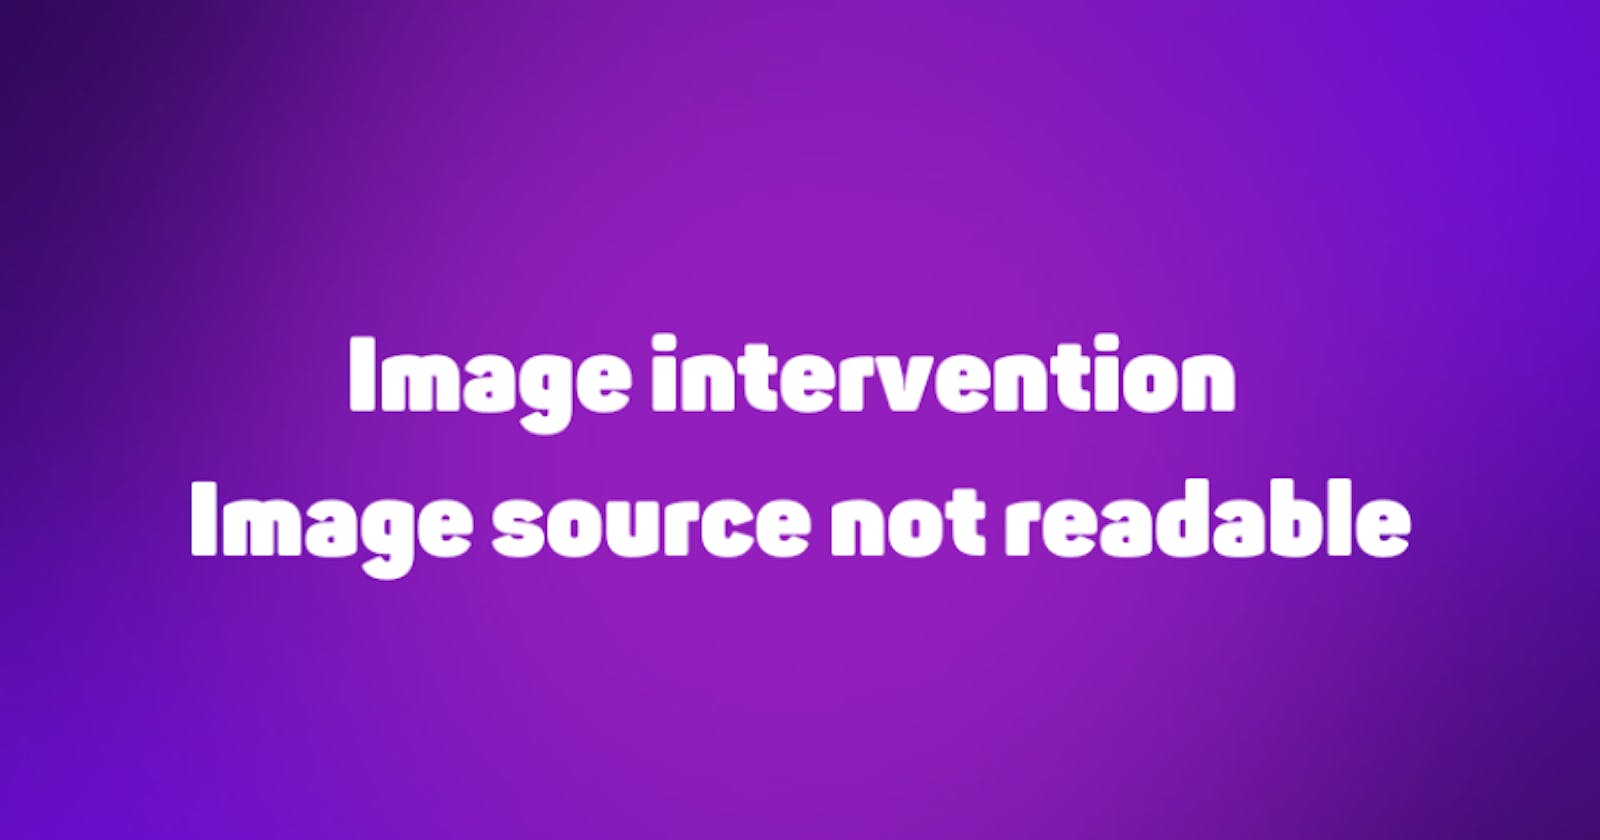 Image intervention - Image source not readable